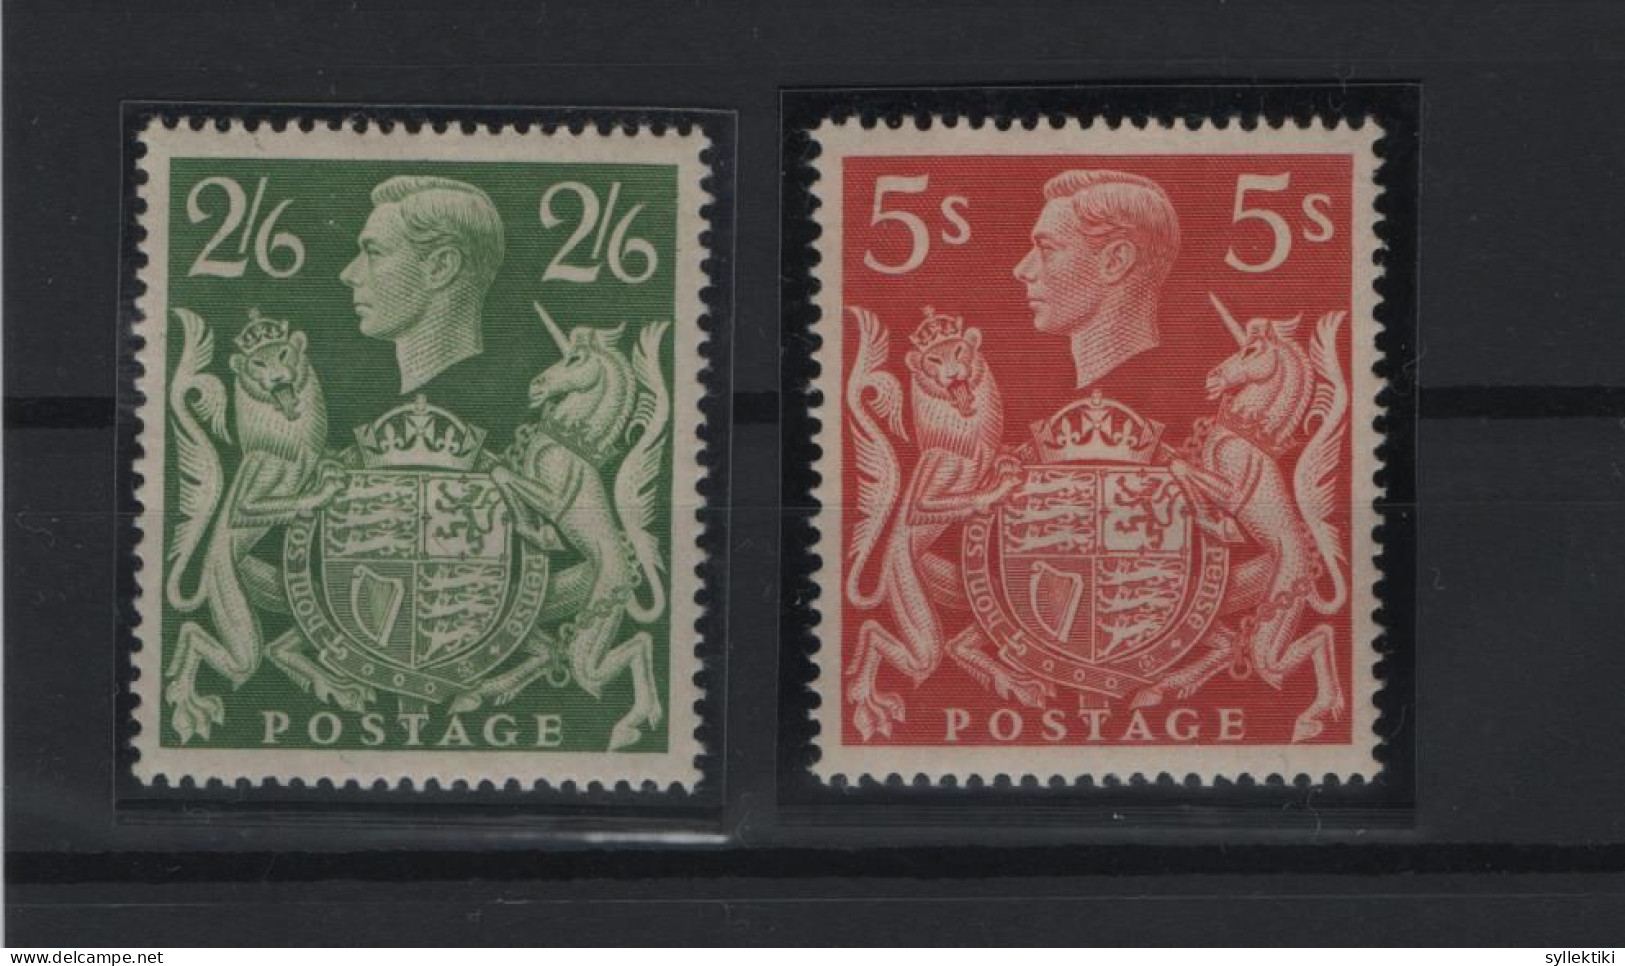 GREAT BRITAIN 1939 KGVI 2/6 & 5 SHILLINGS 2 DIFFERENT MNH STAMPS  STANLEY GIBBONS N 476b, 477  AND VALUE GBP 35.00 - Nuovi